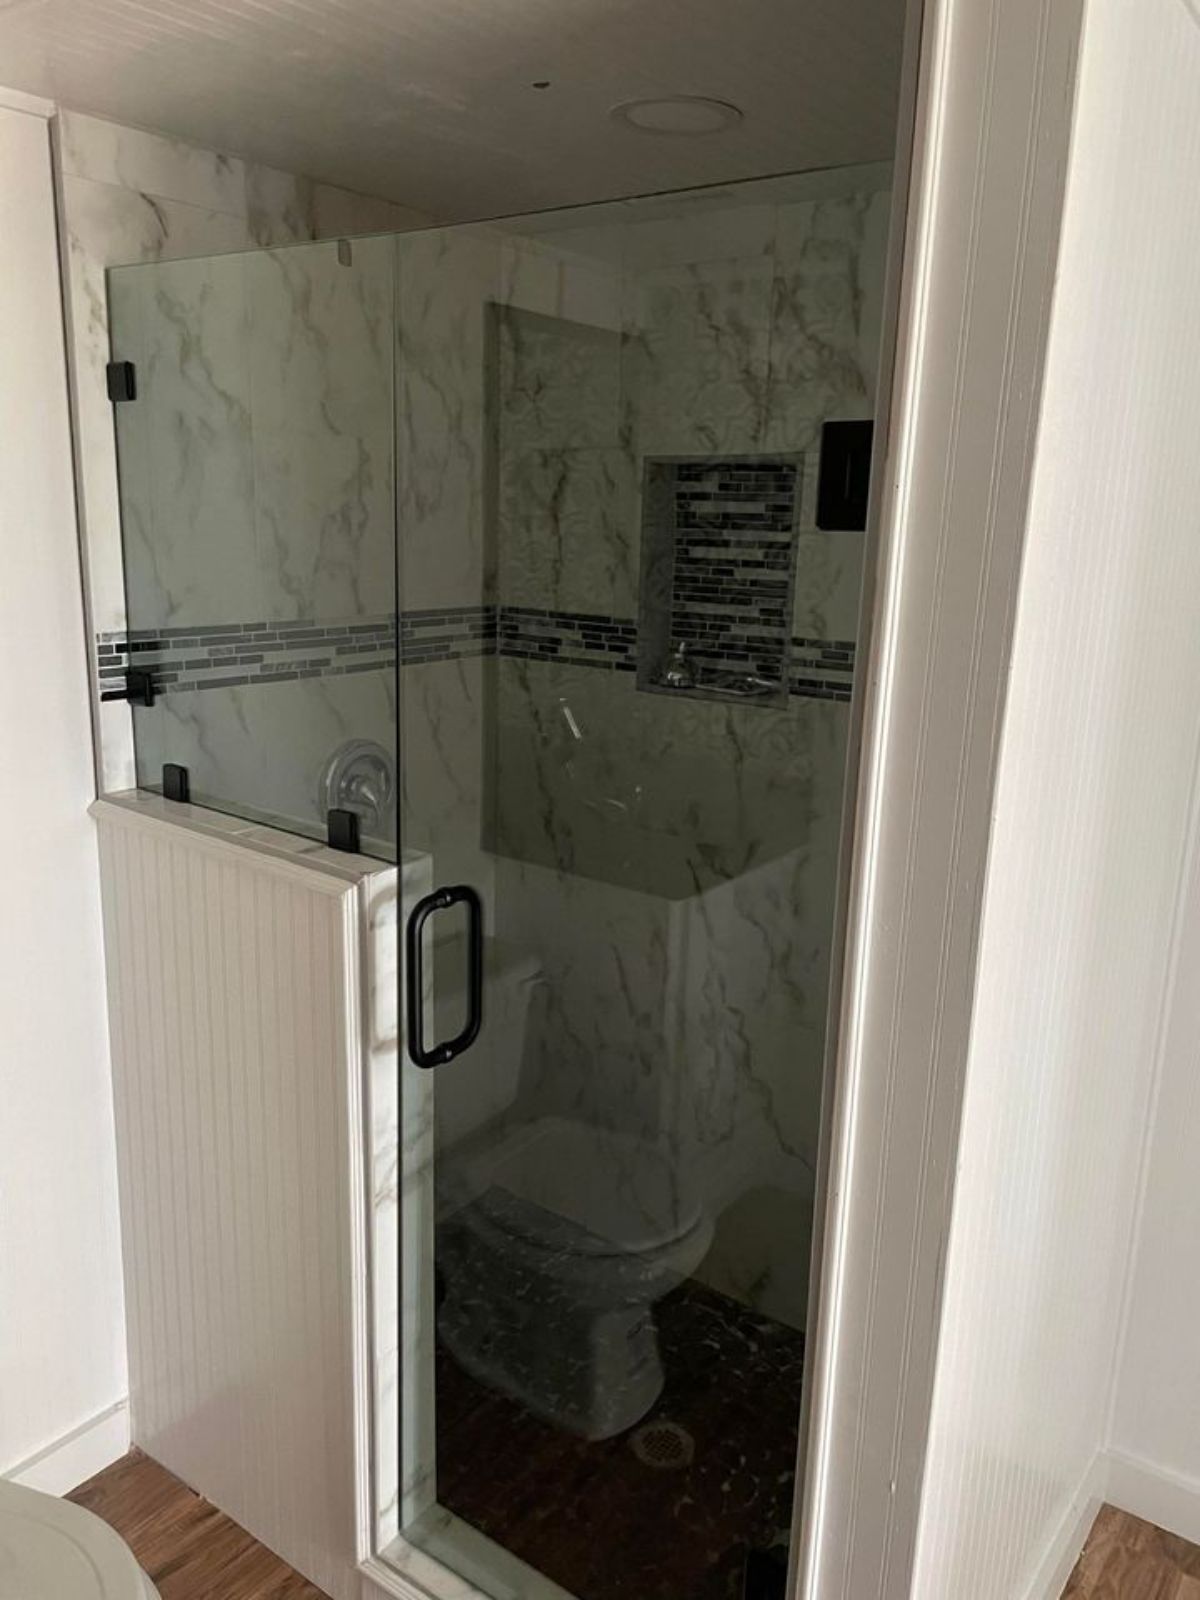 Shower area of 29' Long Luxury Tiny Home On Wheels